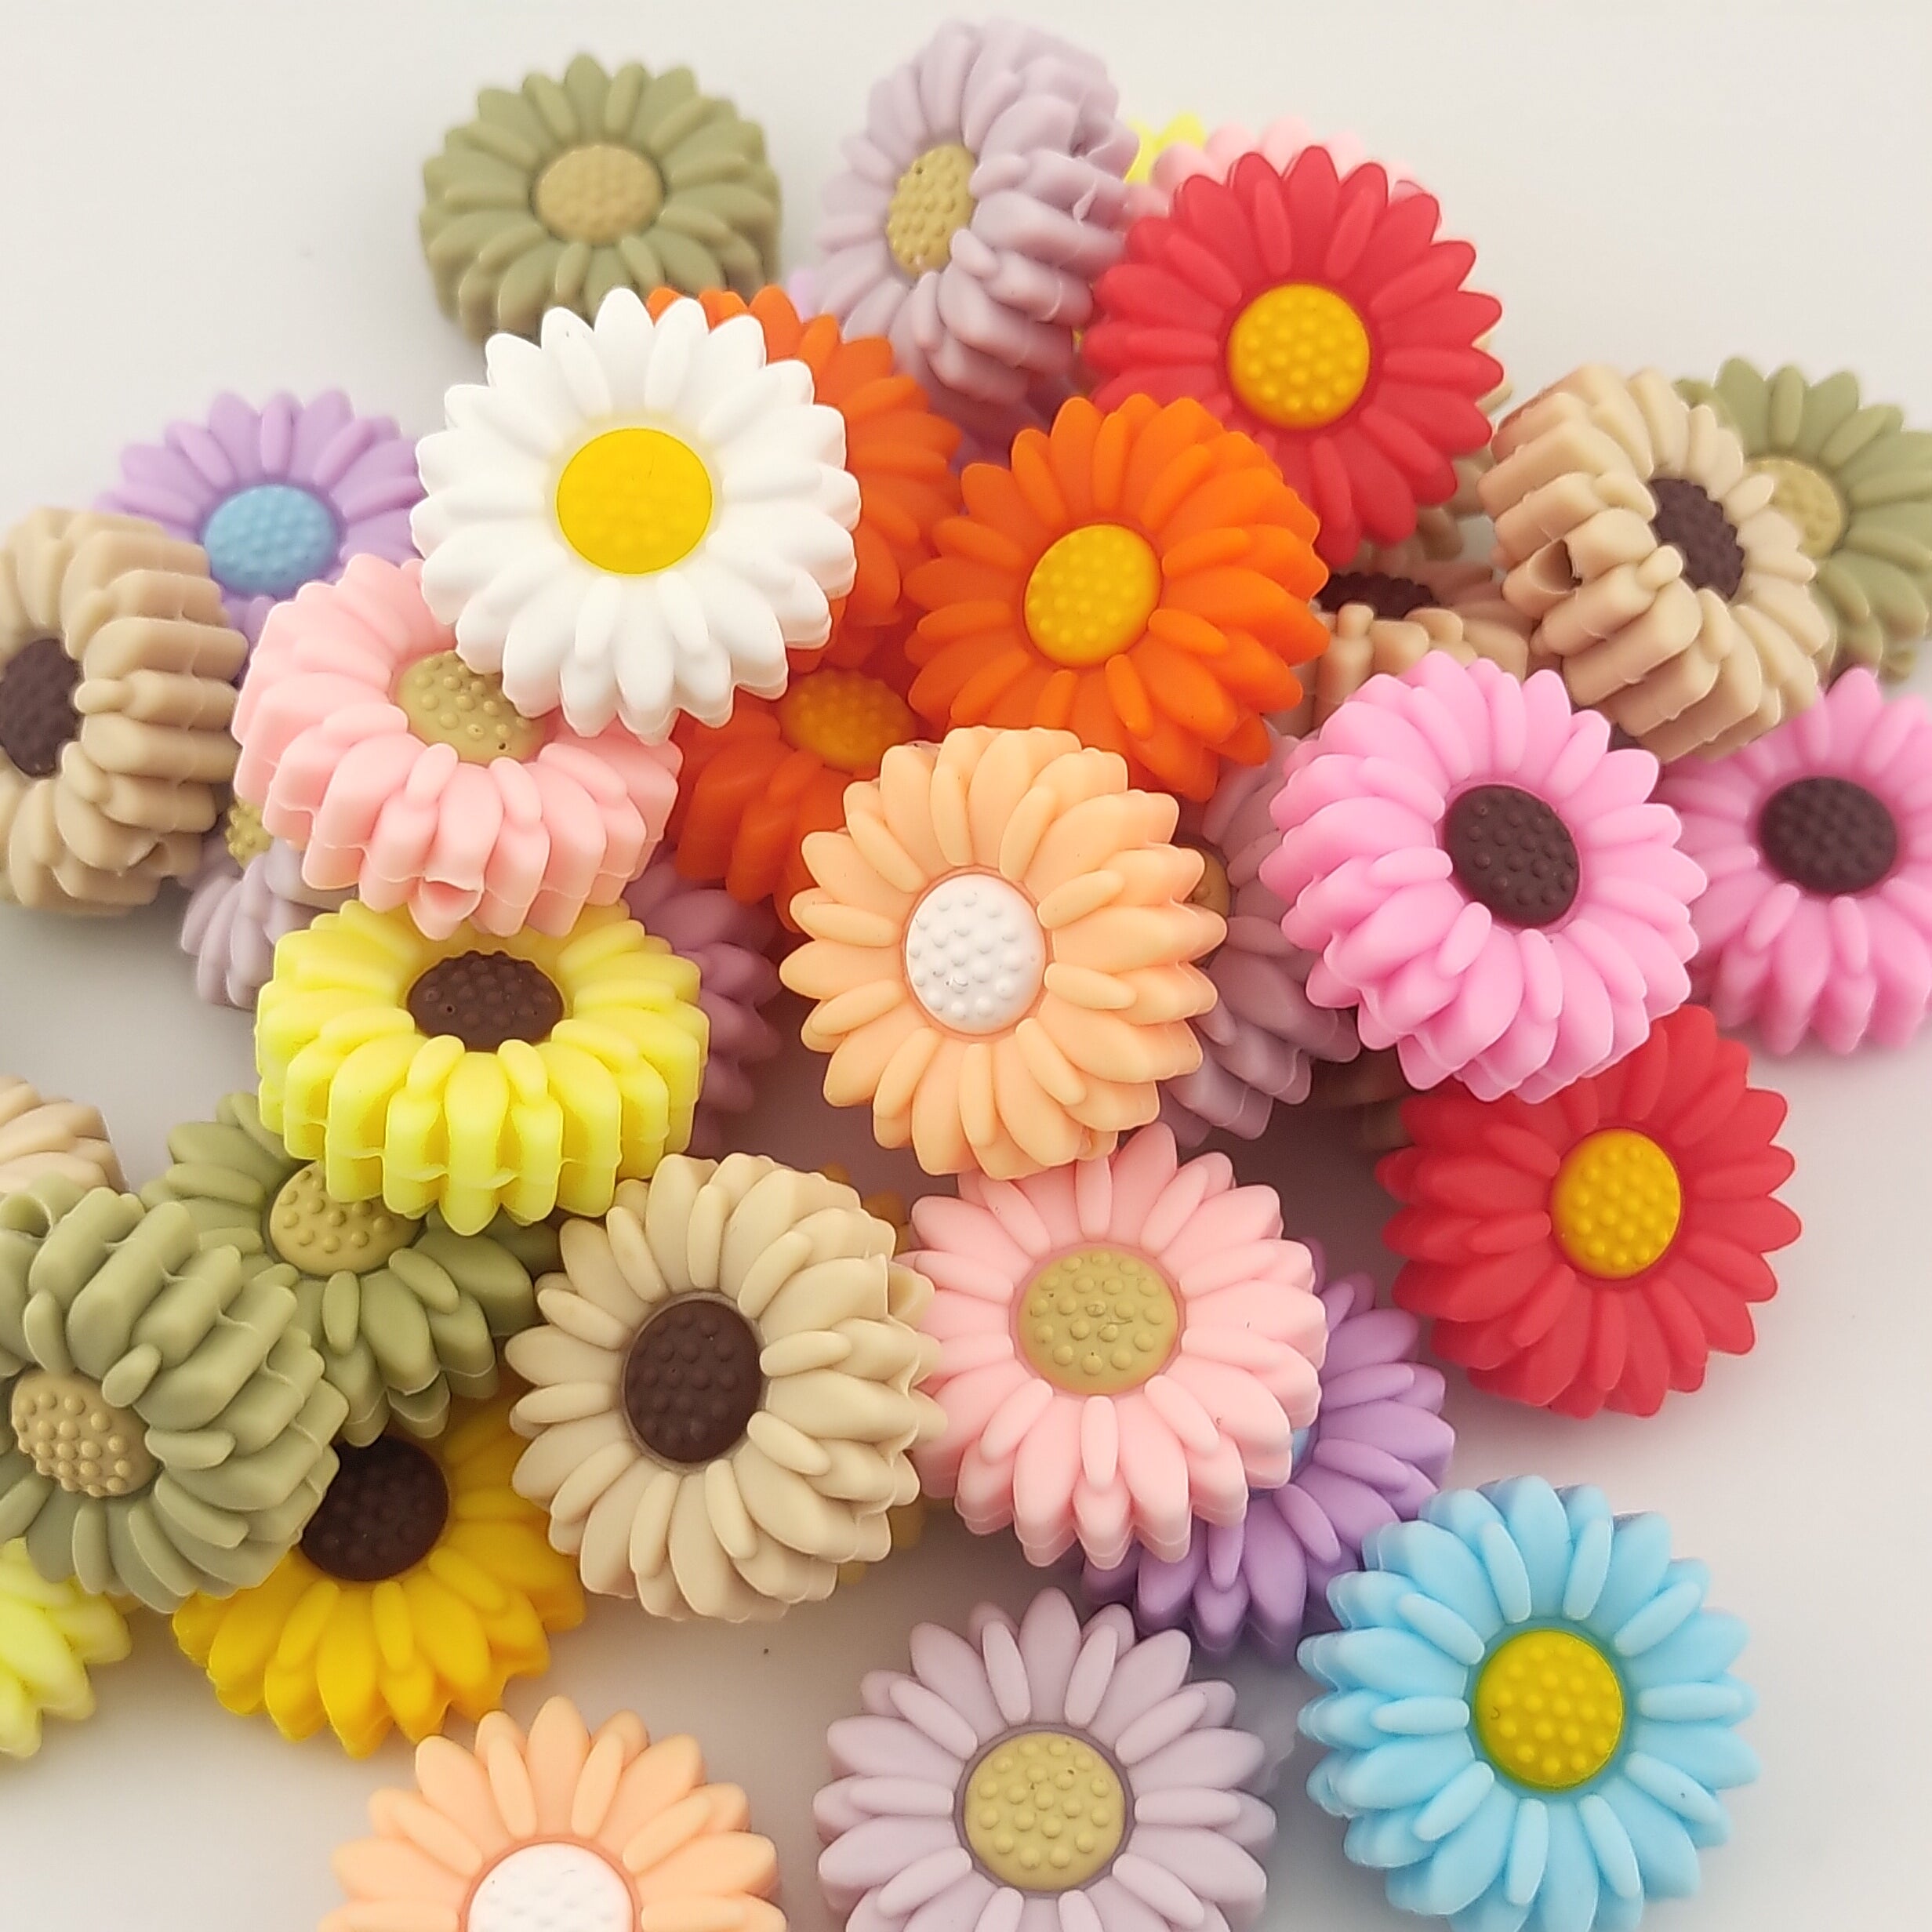 20 Pieces 20MM Mixed Color Daisy Follower Silicone Focal Beads